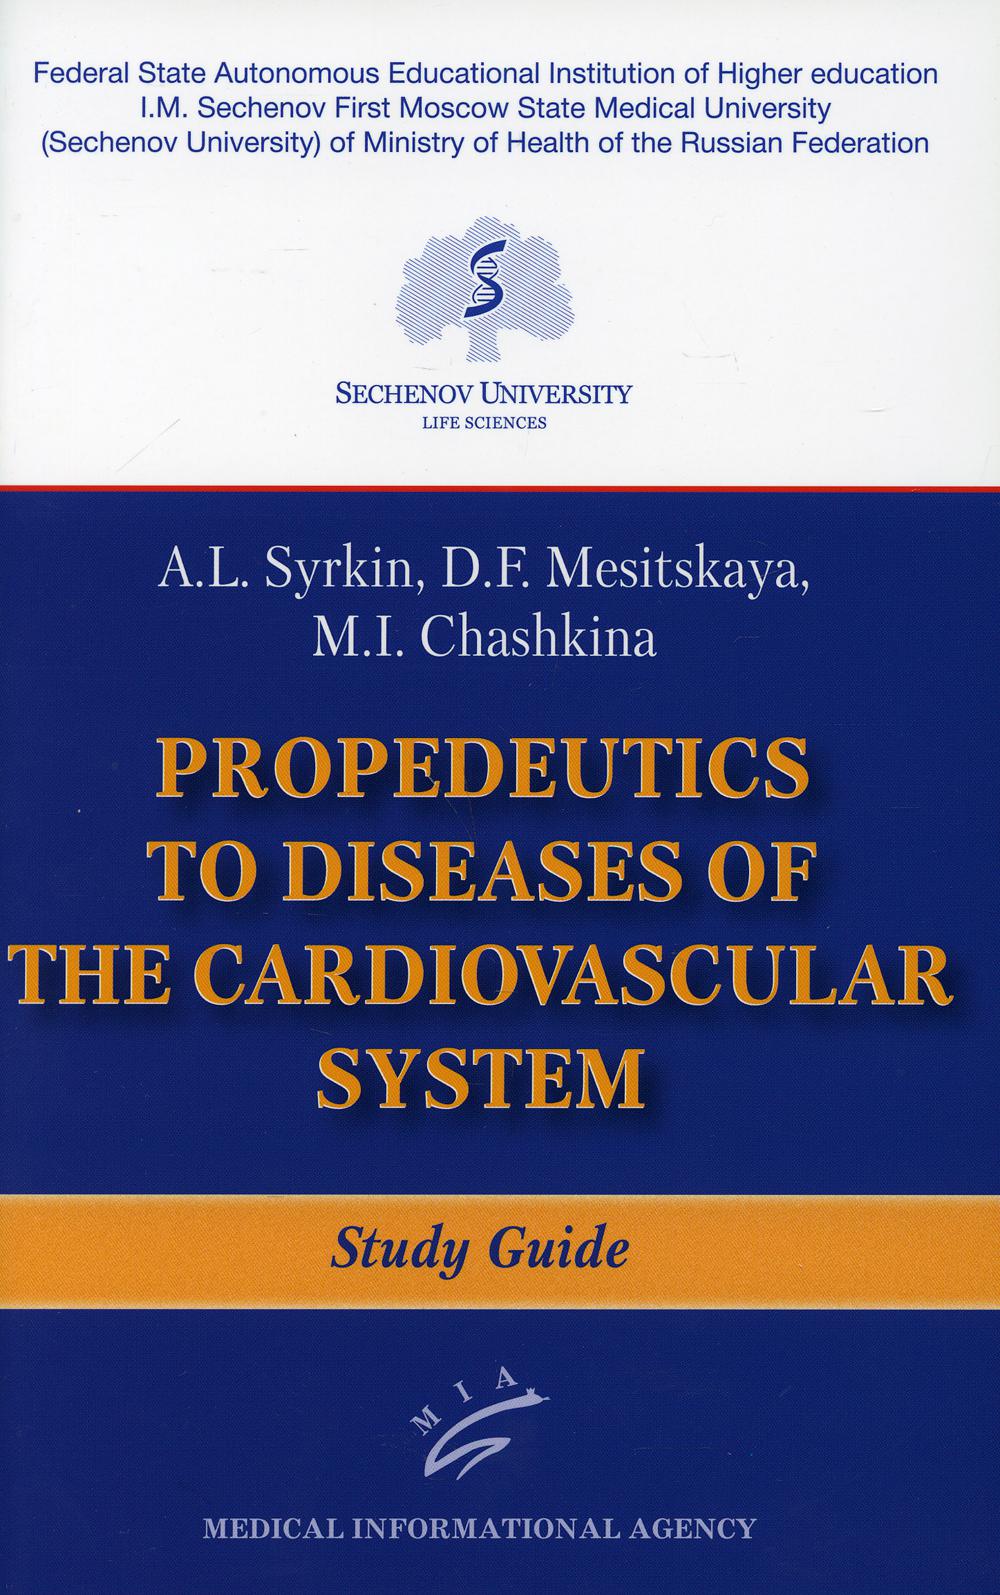 Propaedeutics to Diseases of the Cardiovascular System: Study Guide